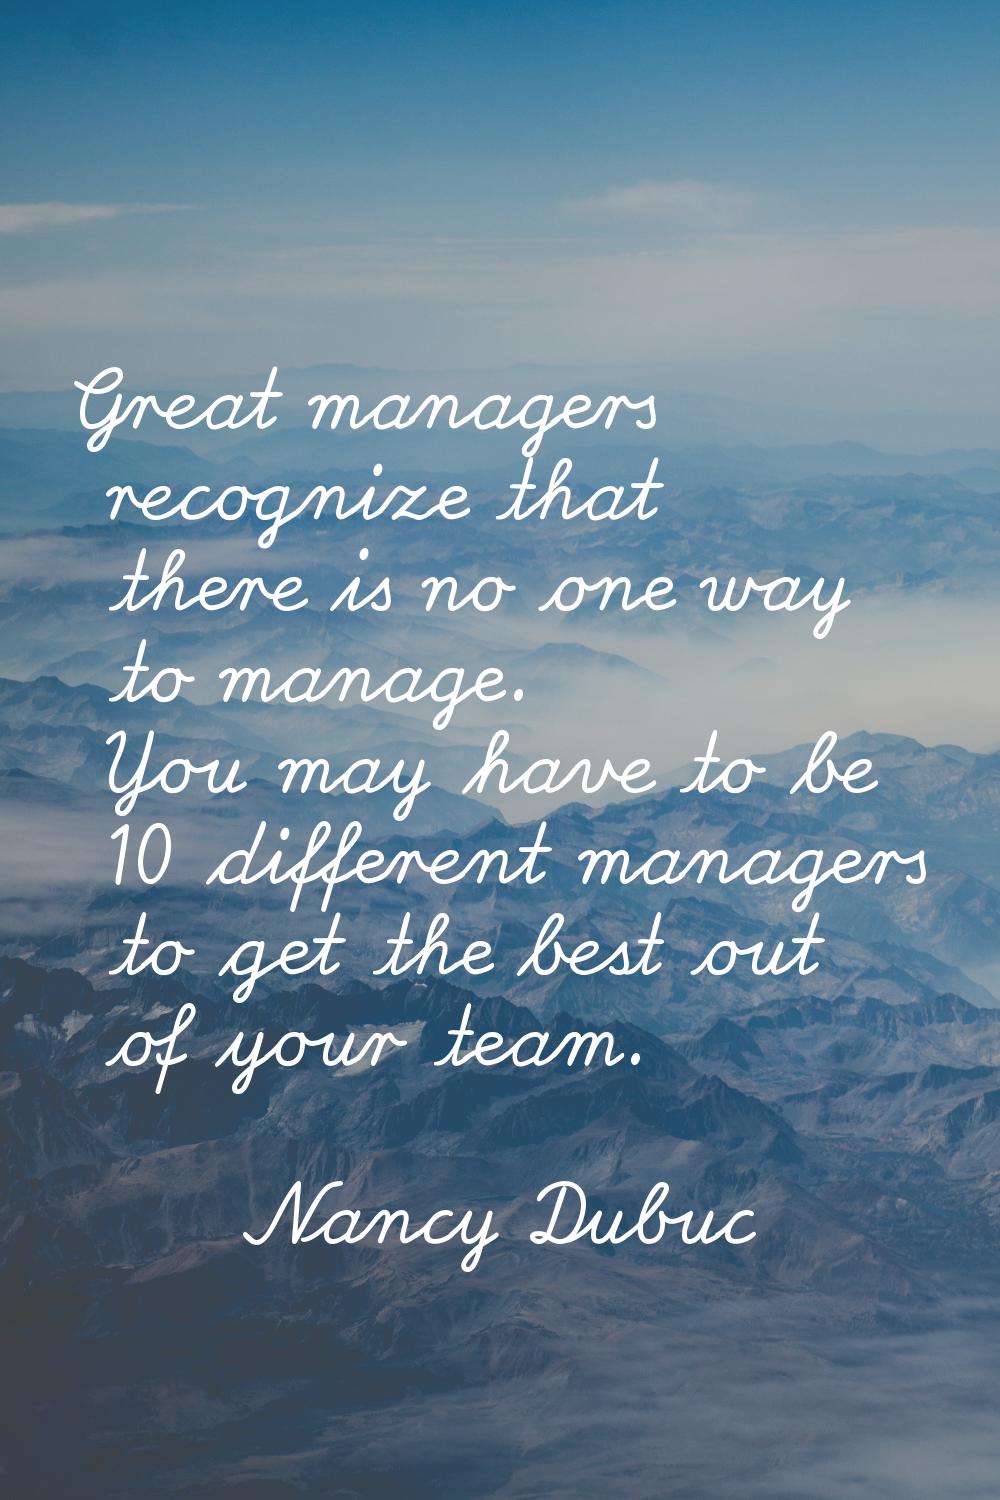 Great managers recognize that there is no one way to manage. You may have to be 10 different manage